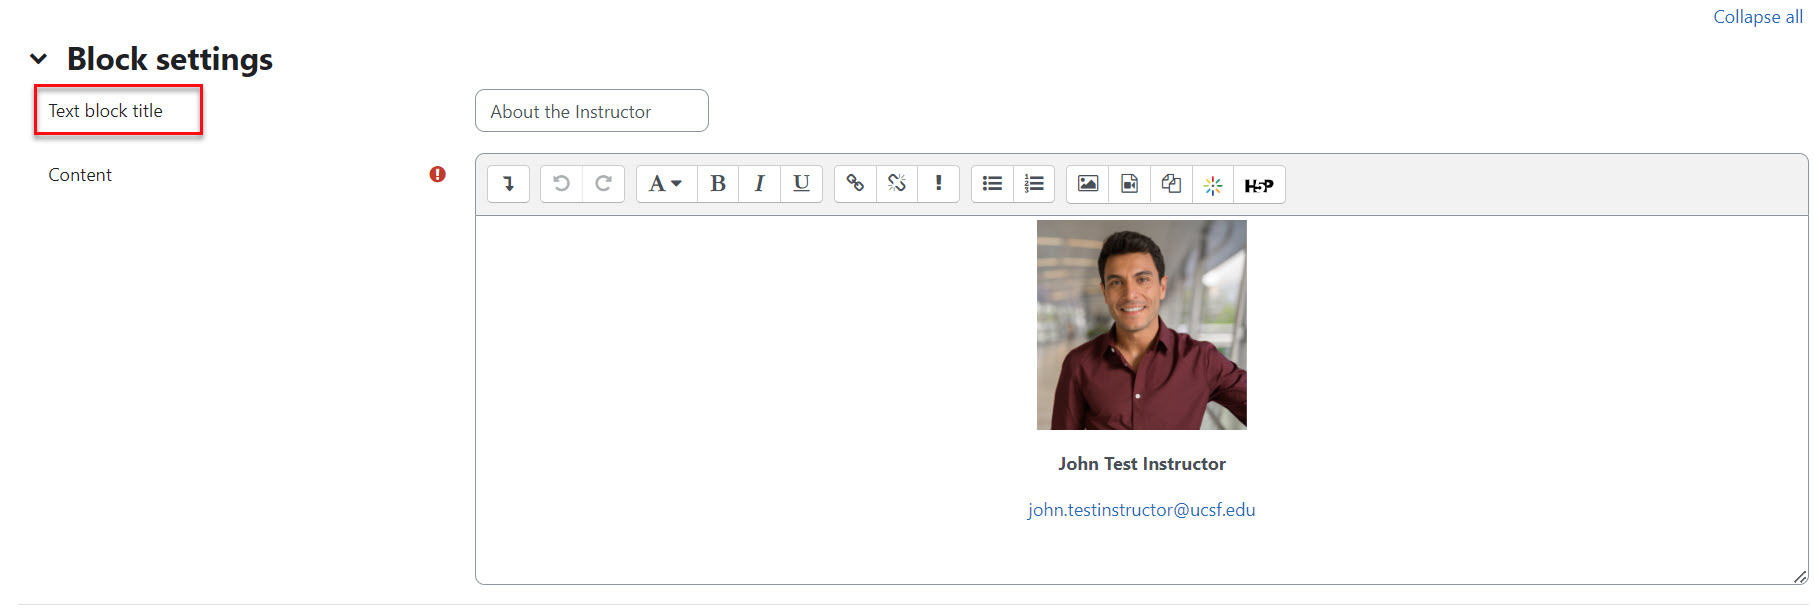 A screenshot example of how to add info on text block page from the instructor or manager perspective.jpg